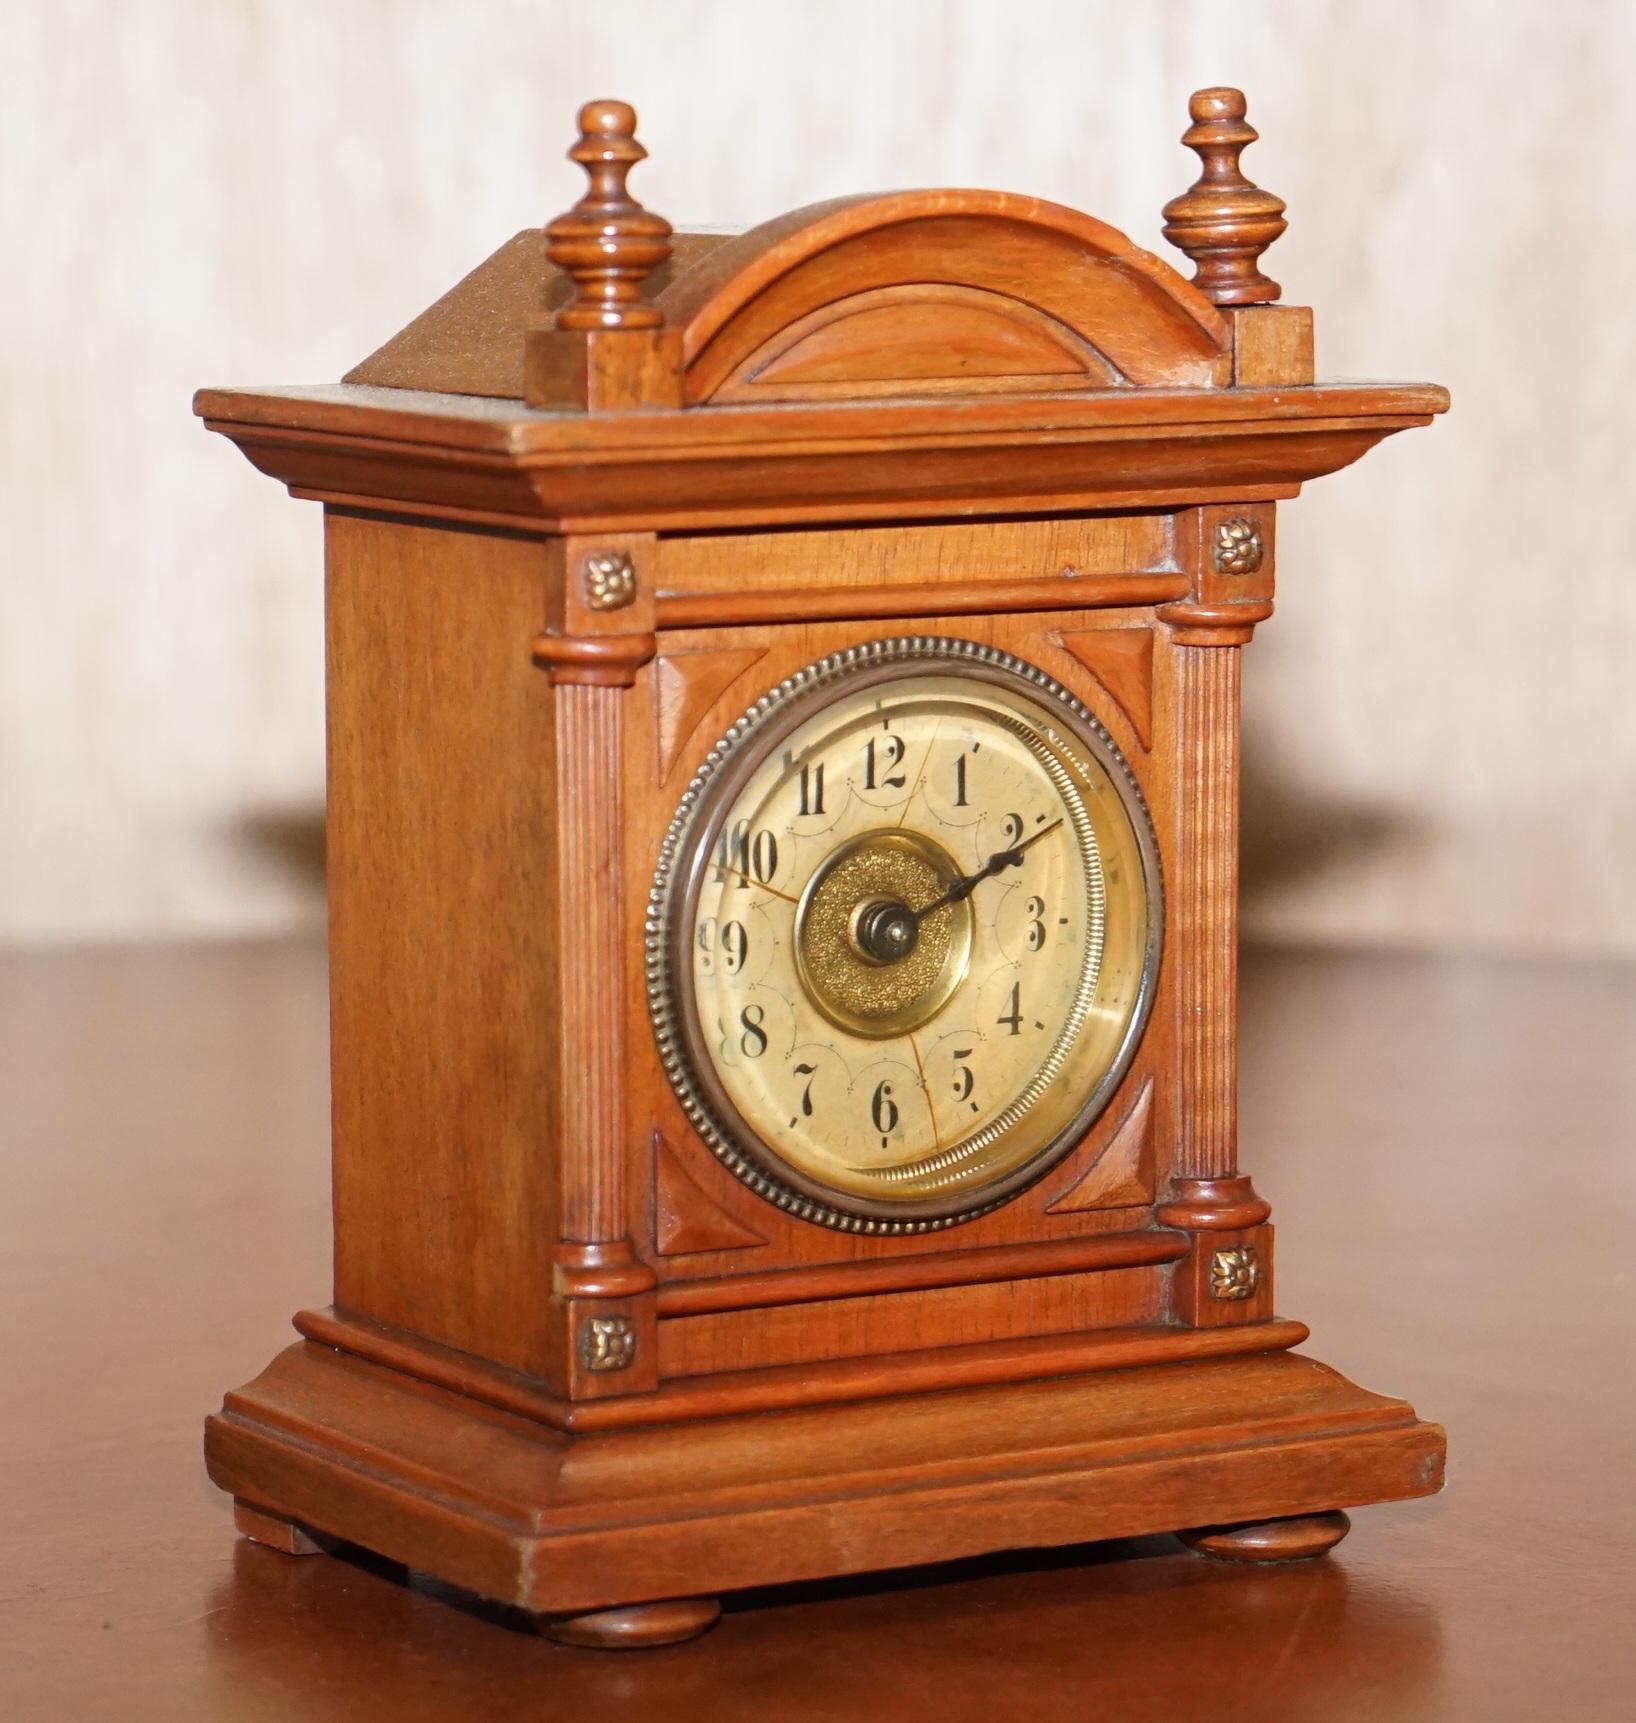 We are delighted to offer for sale this nice F Unghans J Mantle alarm clock for restoration

It is not currently working, I have no idea what it needs, otherwise it looks perfect

Dimensions:

Height 21.5cm

Width 15.5cm

Depth